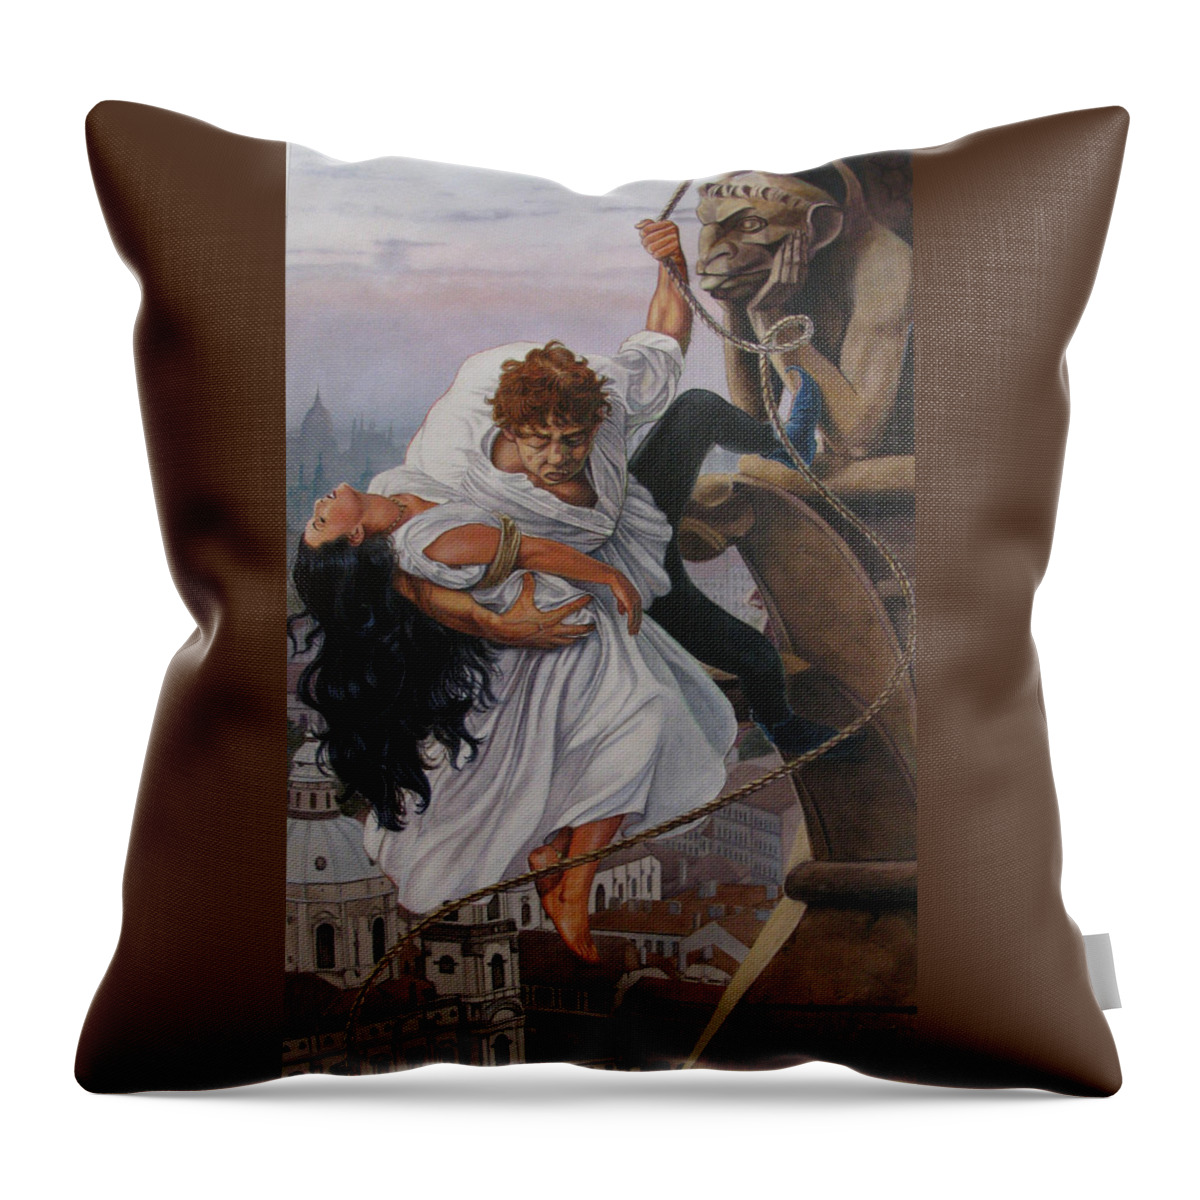 Whelan Art Throw Pillow featuring the painting The Hunchback of Notre Dame by Patrick Whelan